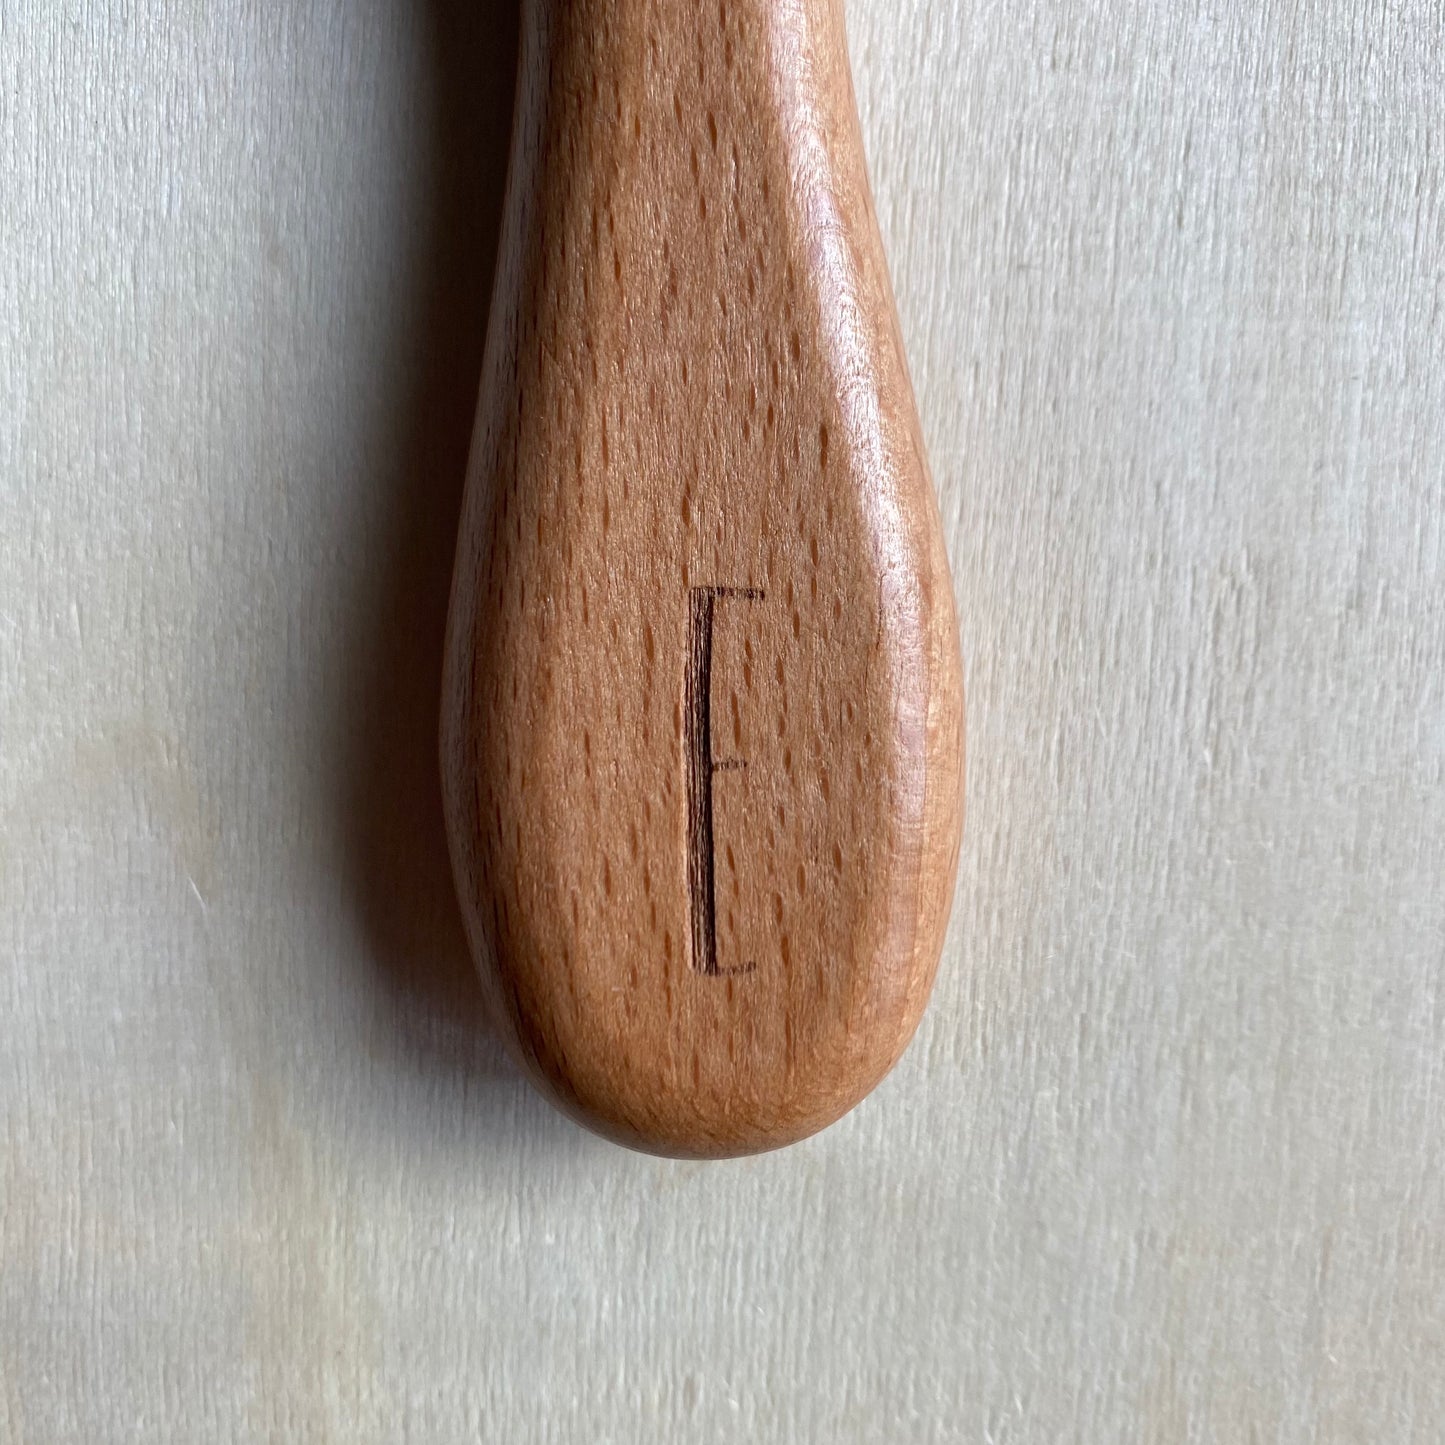 Natural Baby Hair Brush with initialled handle (A-Z)